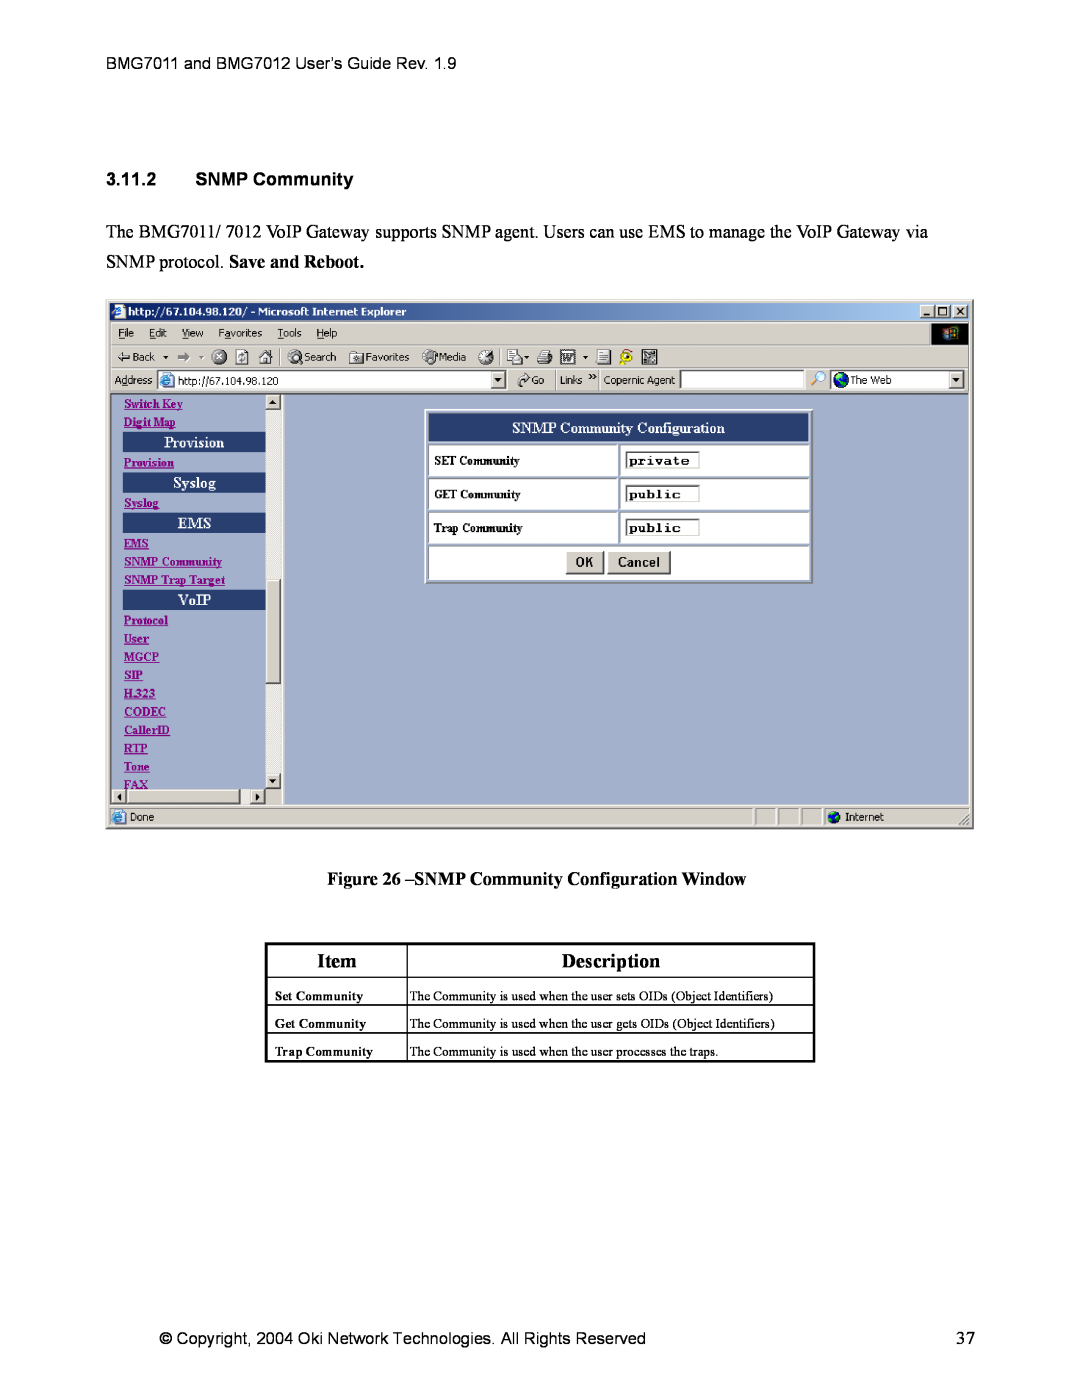 Oki BMG7011, BMG7012 3.11.2SNMP Community, SNMP protocol. Save and Reboot, SNMPCommunity Configuration Window, Description 